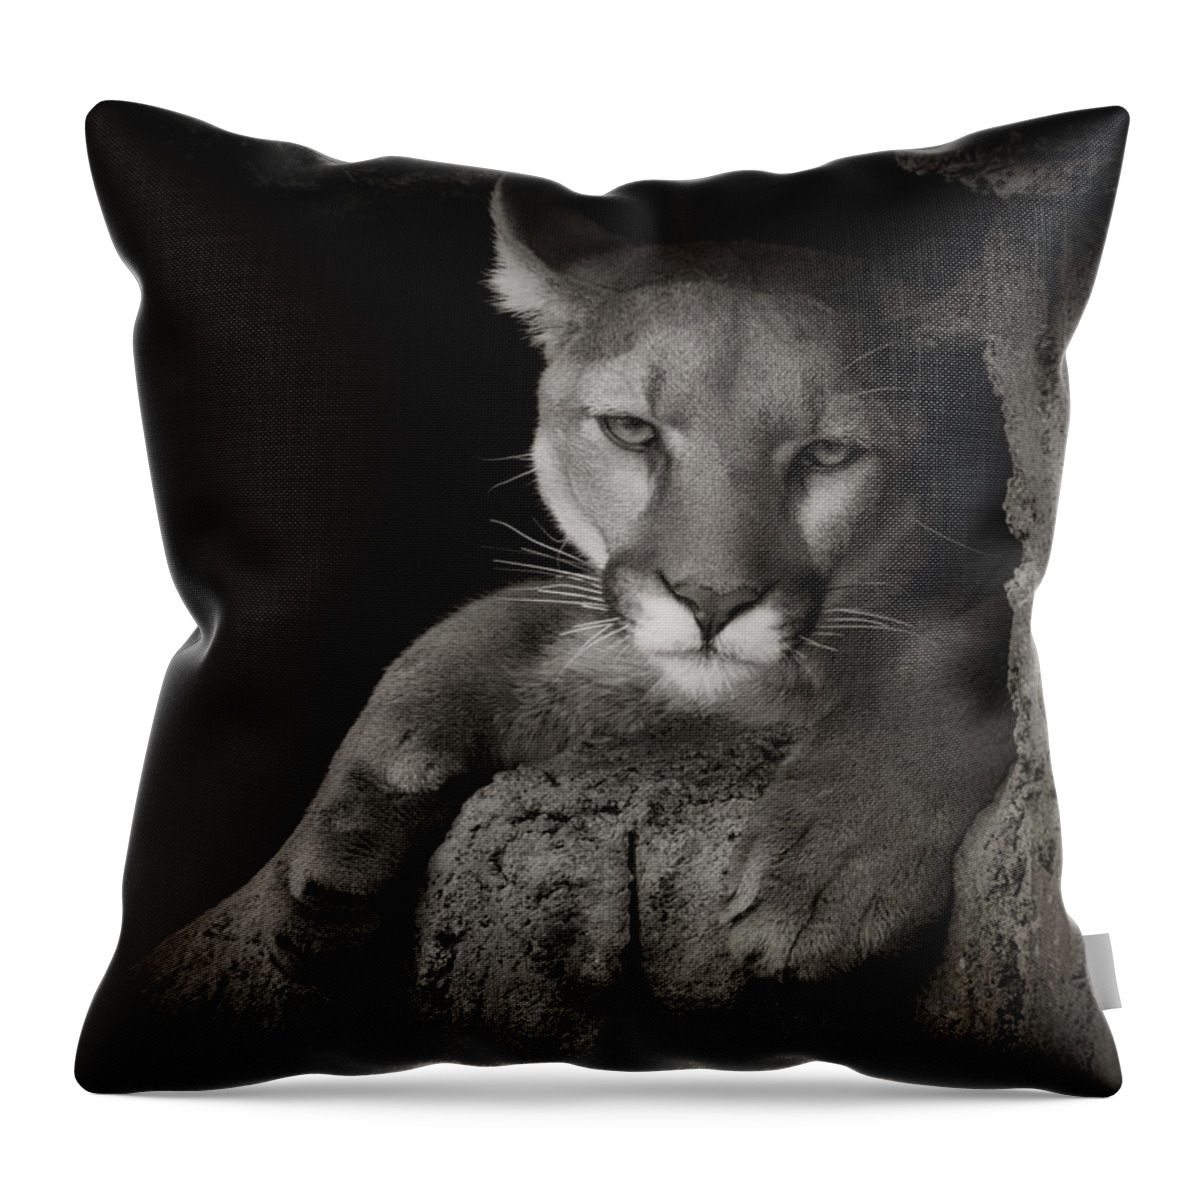 Mountain Lions Throw Pillow featuring the photograph Not A Happy Cat by Elaine Malott